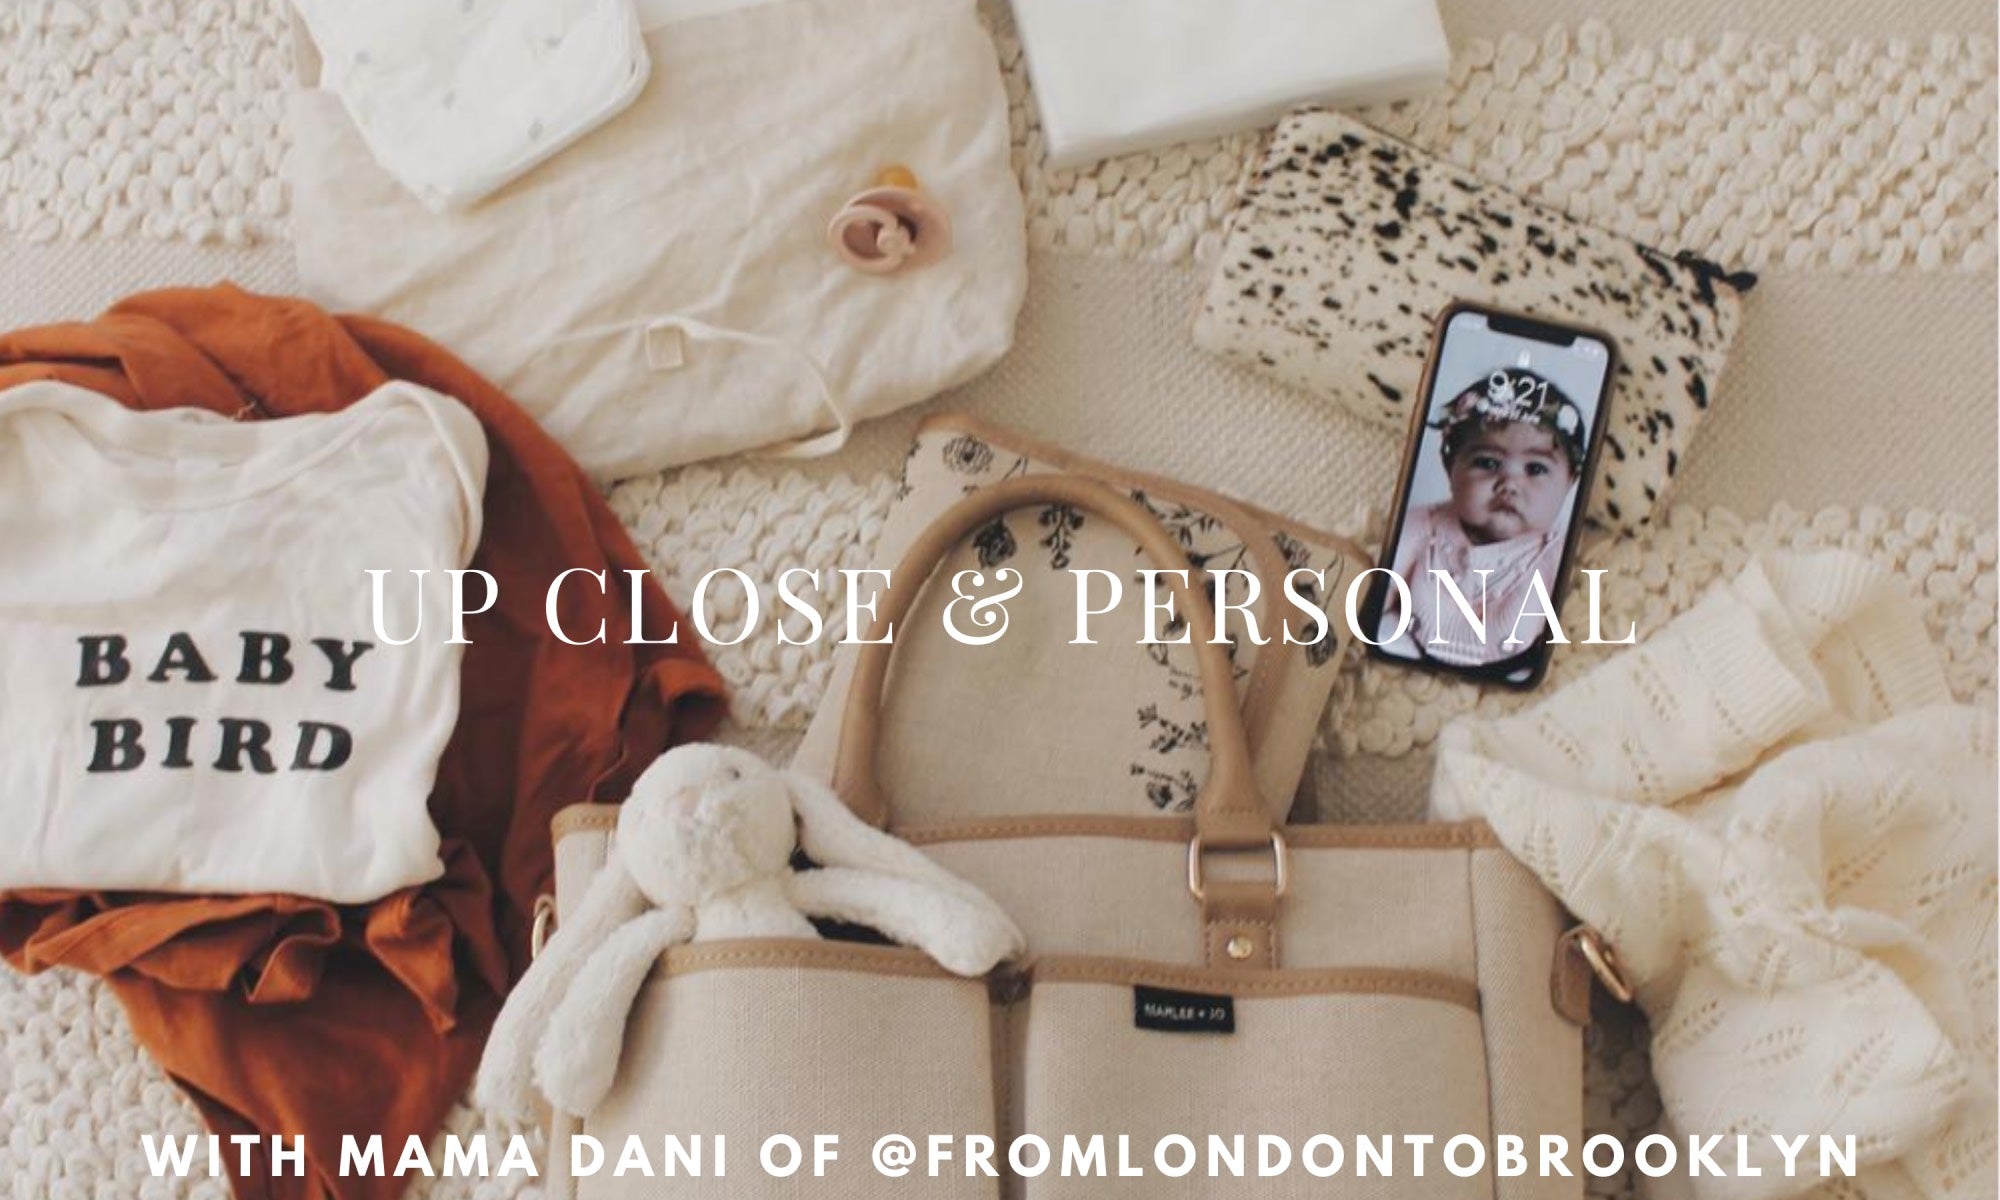 On Living Beautifully with Dani of @fromlondontobrooklyn